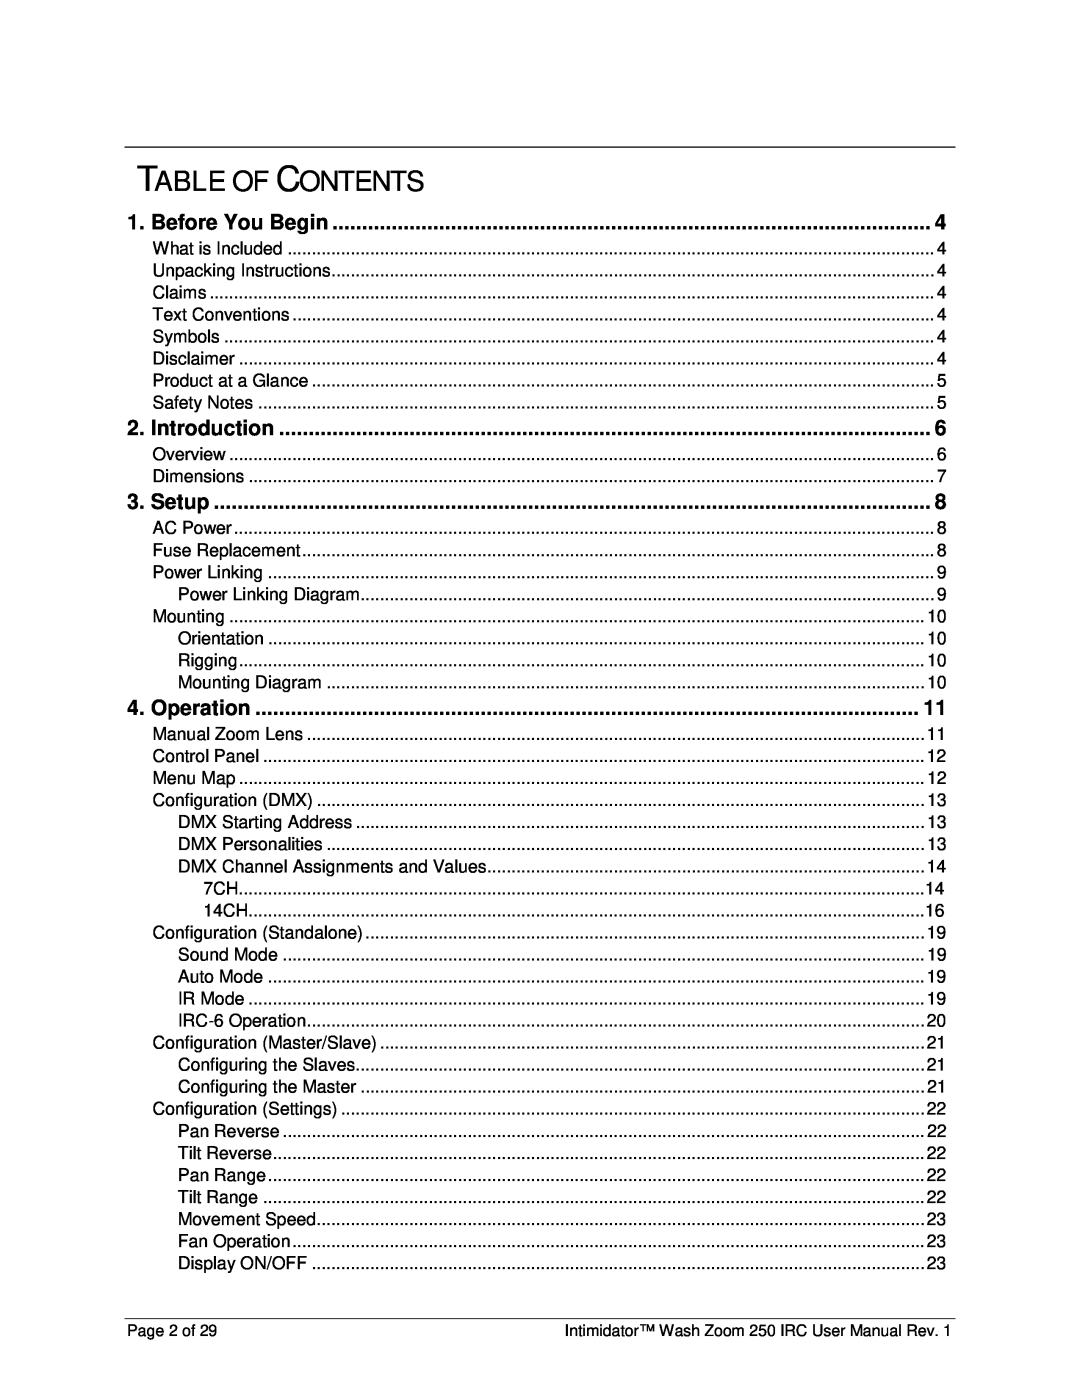 Chauvet 250irc user manual Table Of Contents, Before You Begin, Introduction, Setup, Operation 